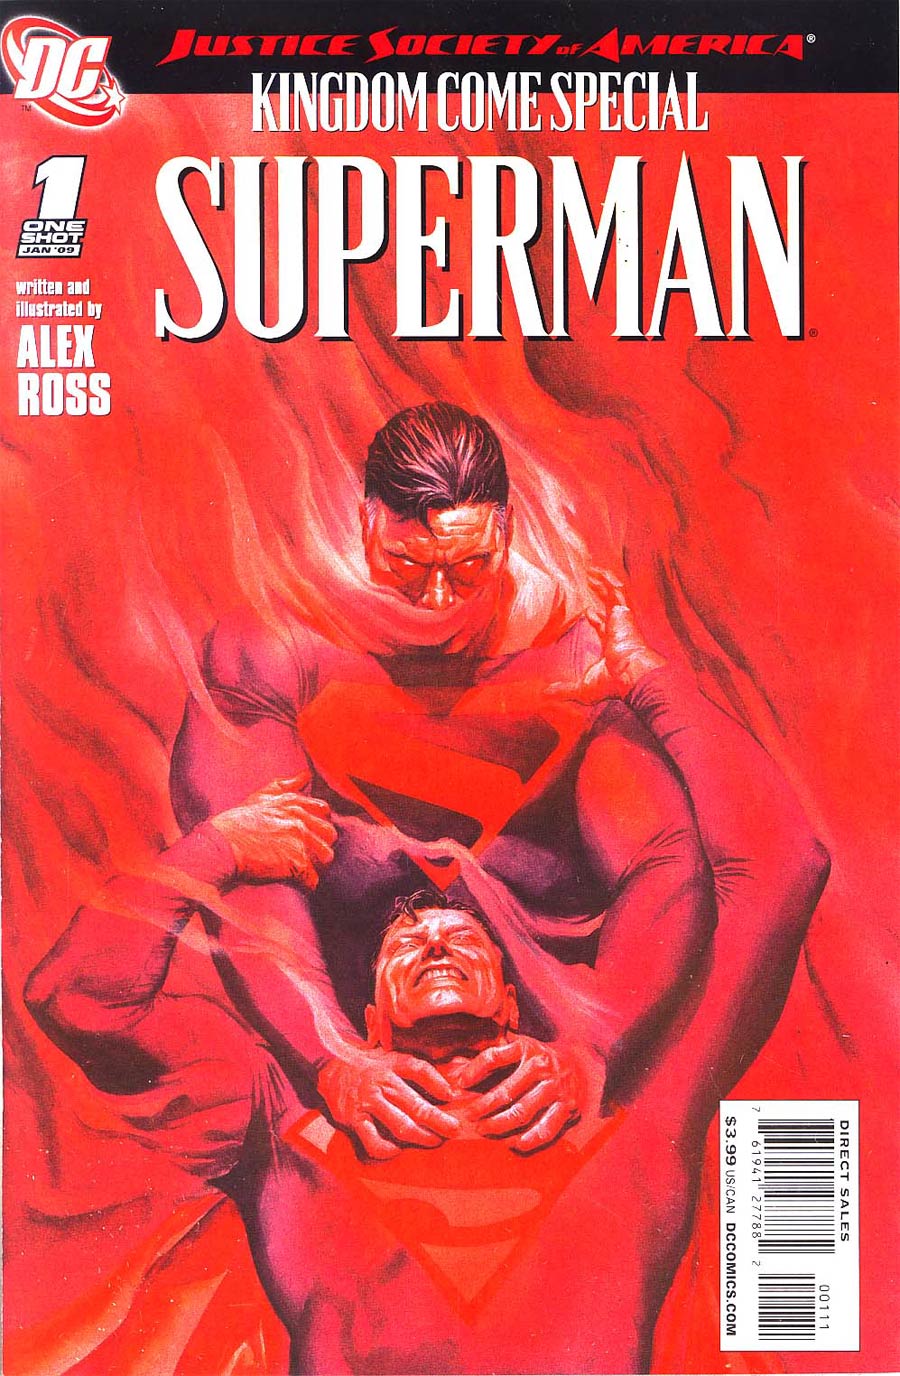 Justice Society Of America Kingdom Come Special Superman #1 Cover A Regular Alex Ross Cover